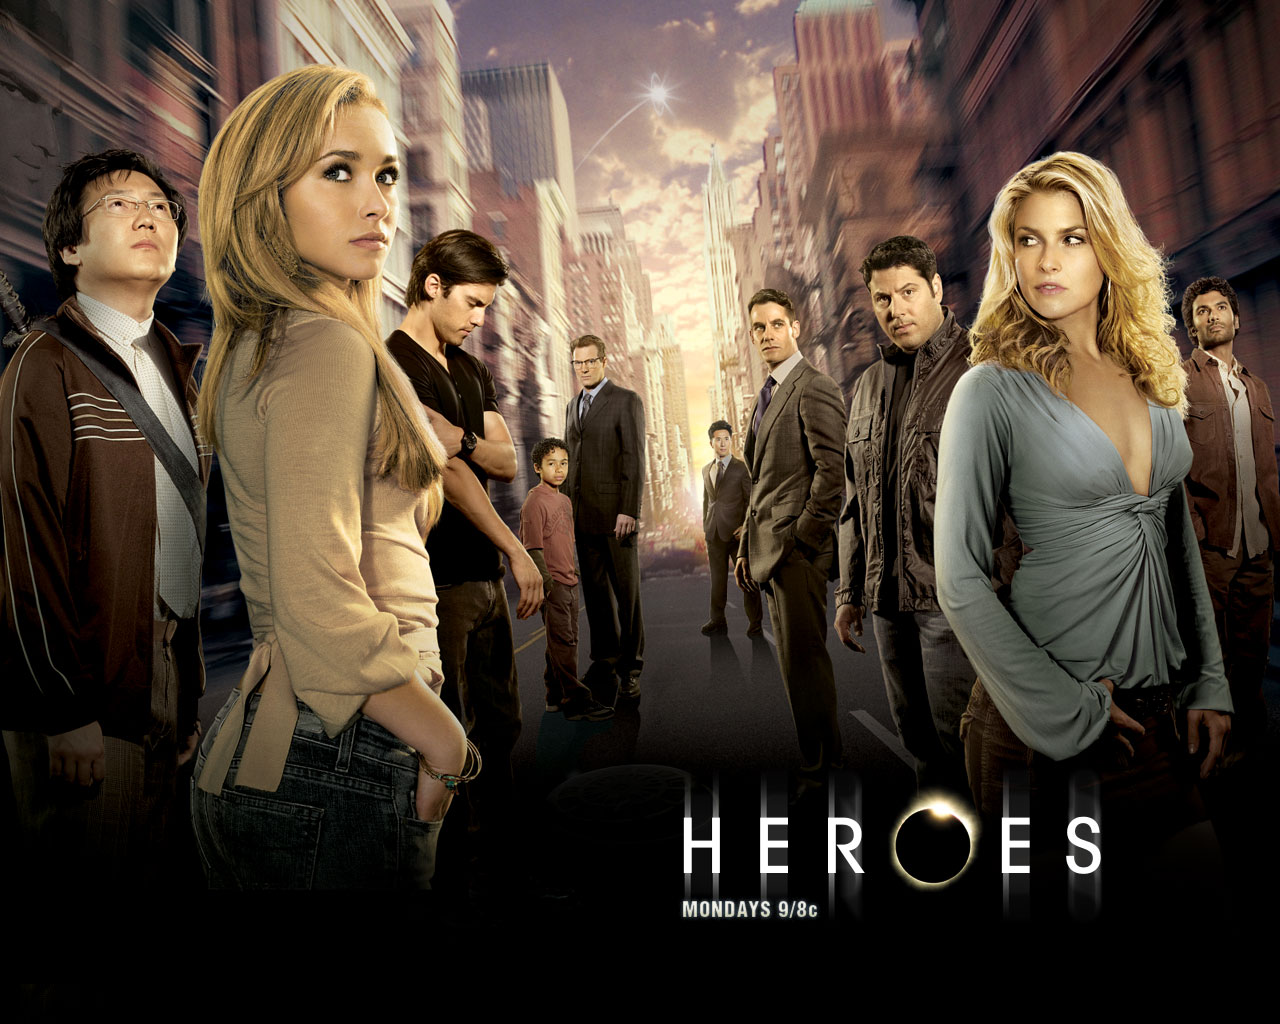 Download full size Heroes wallpaper / Movies / 1280x1024